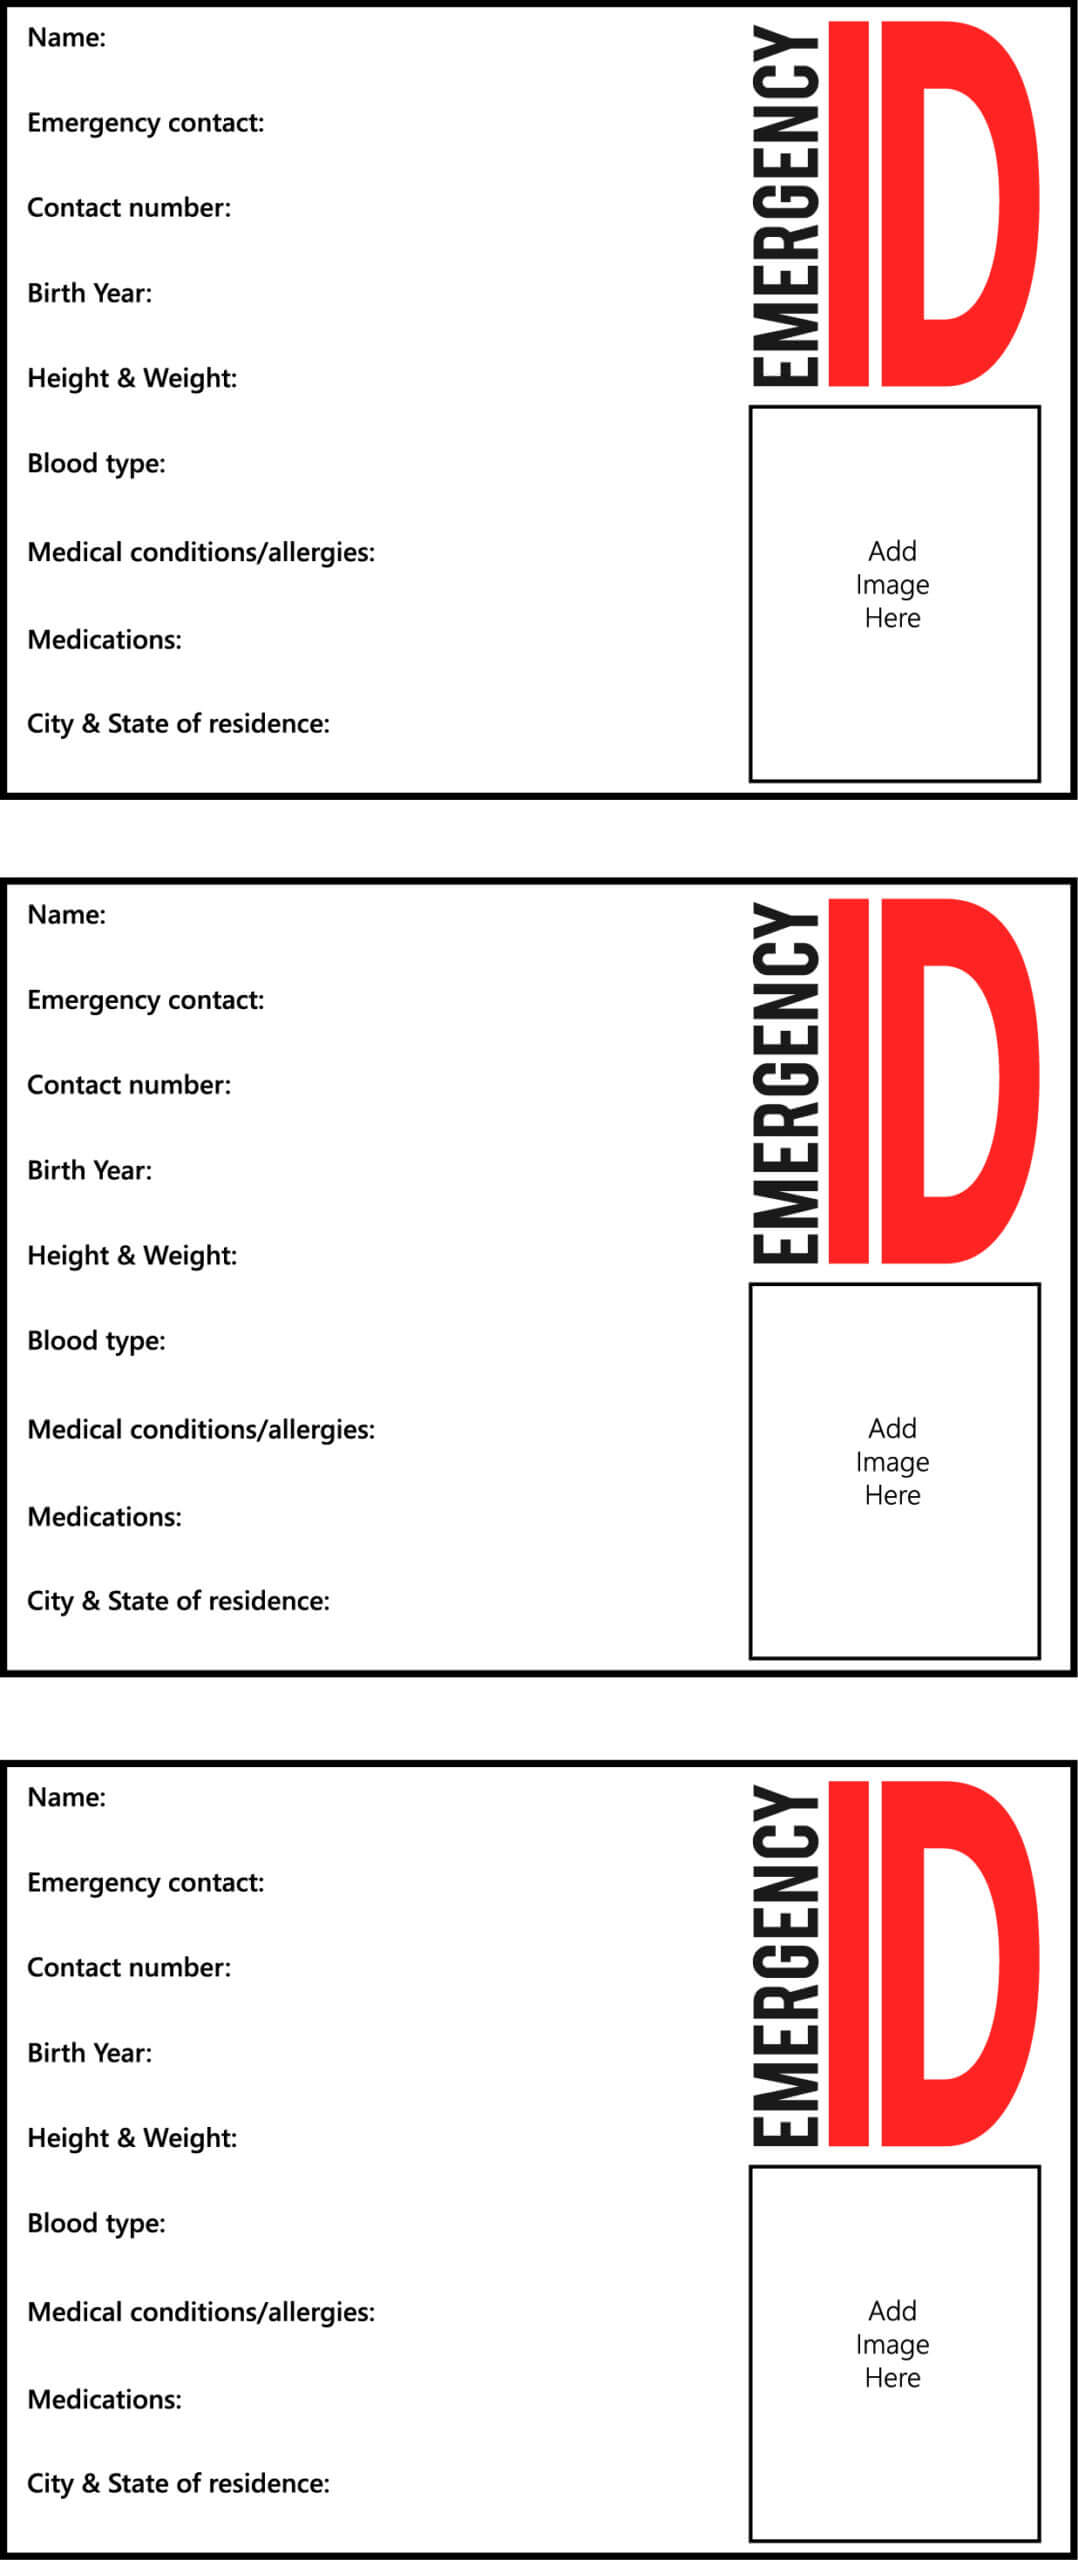 25 Images Of Fire Identification Card Template | Masorler In In Case Of Emergency Card Template